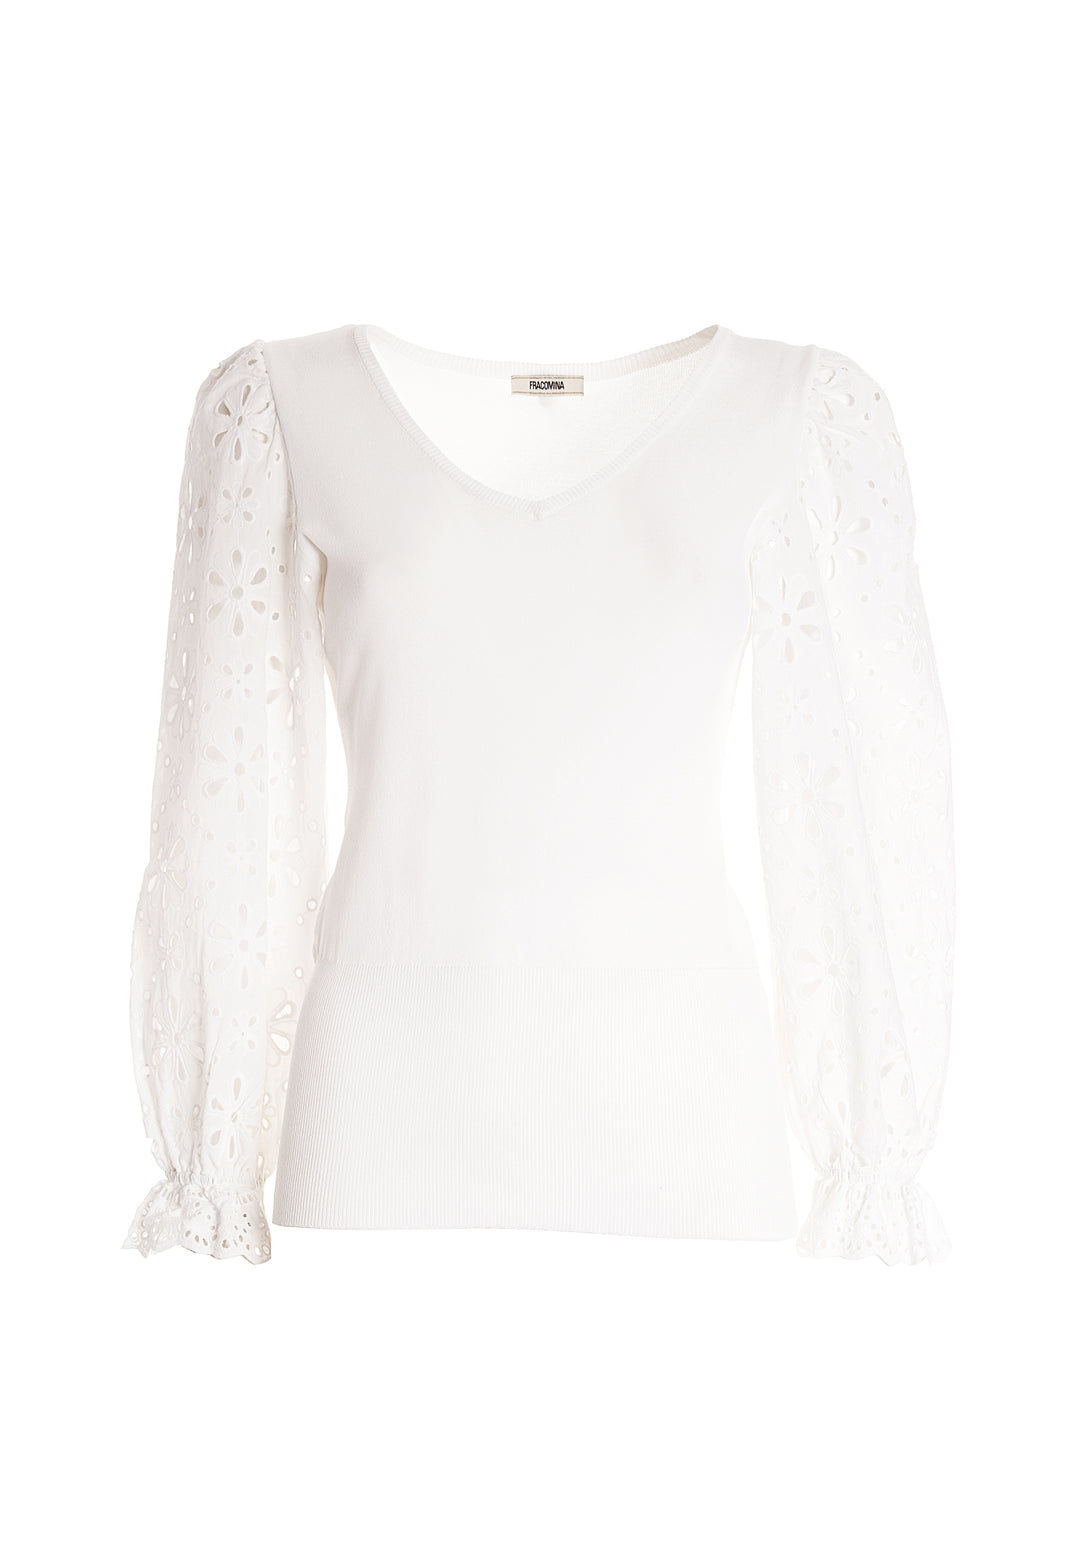 Knitwear regular fit with sleeves made in San Gallo lace